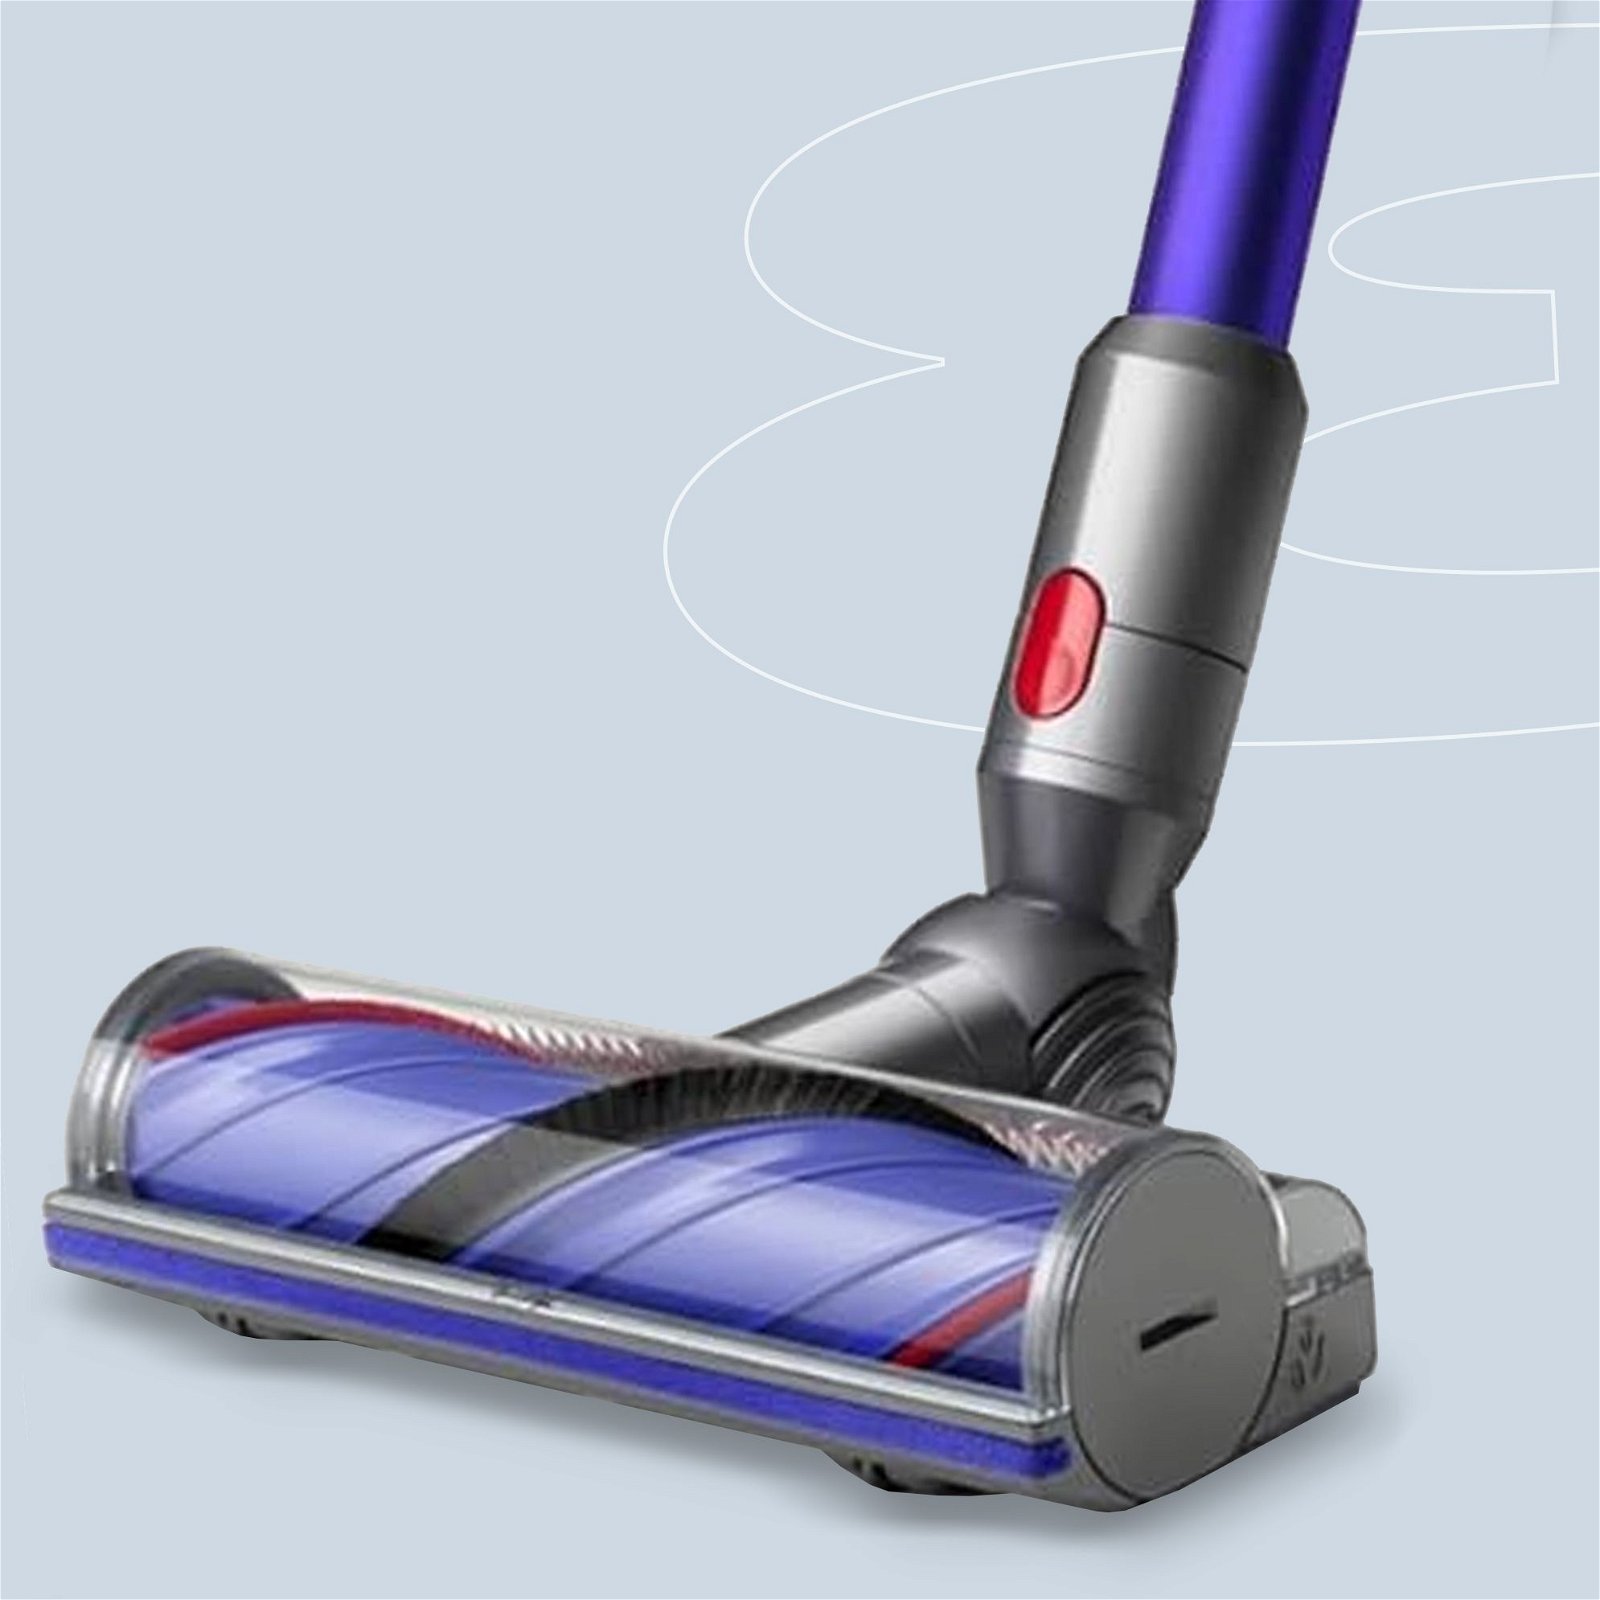 You Can Score One of Dyson's Best Vacuums for Under \\$500